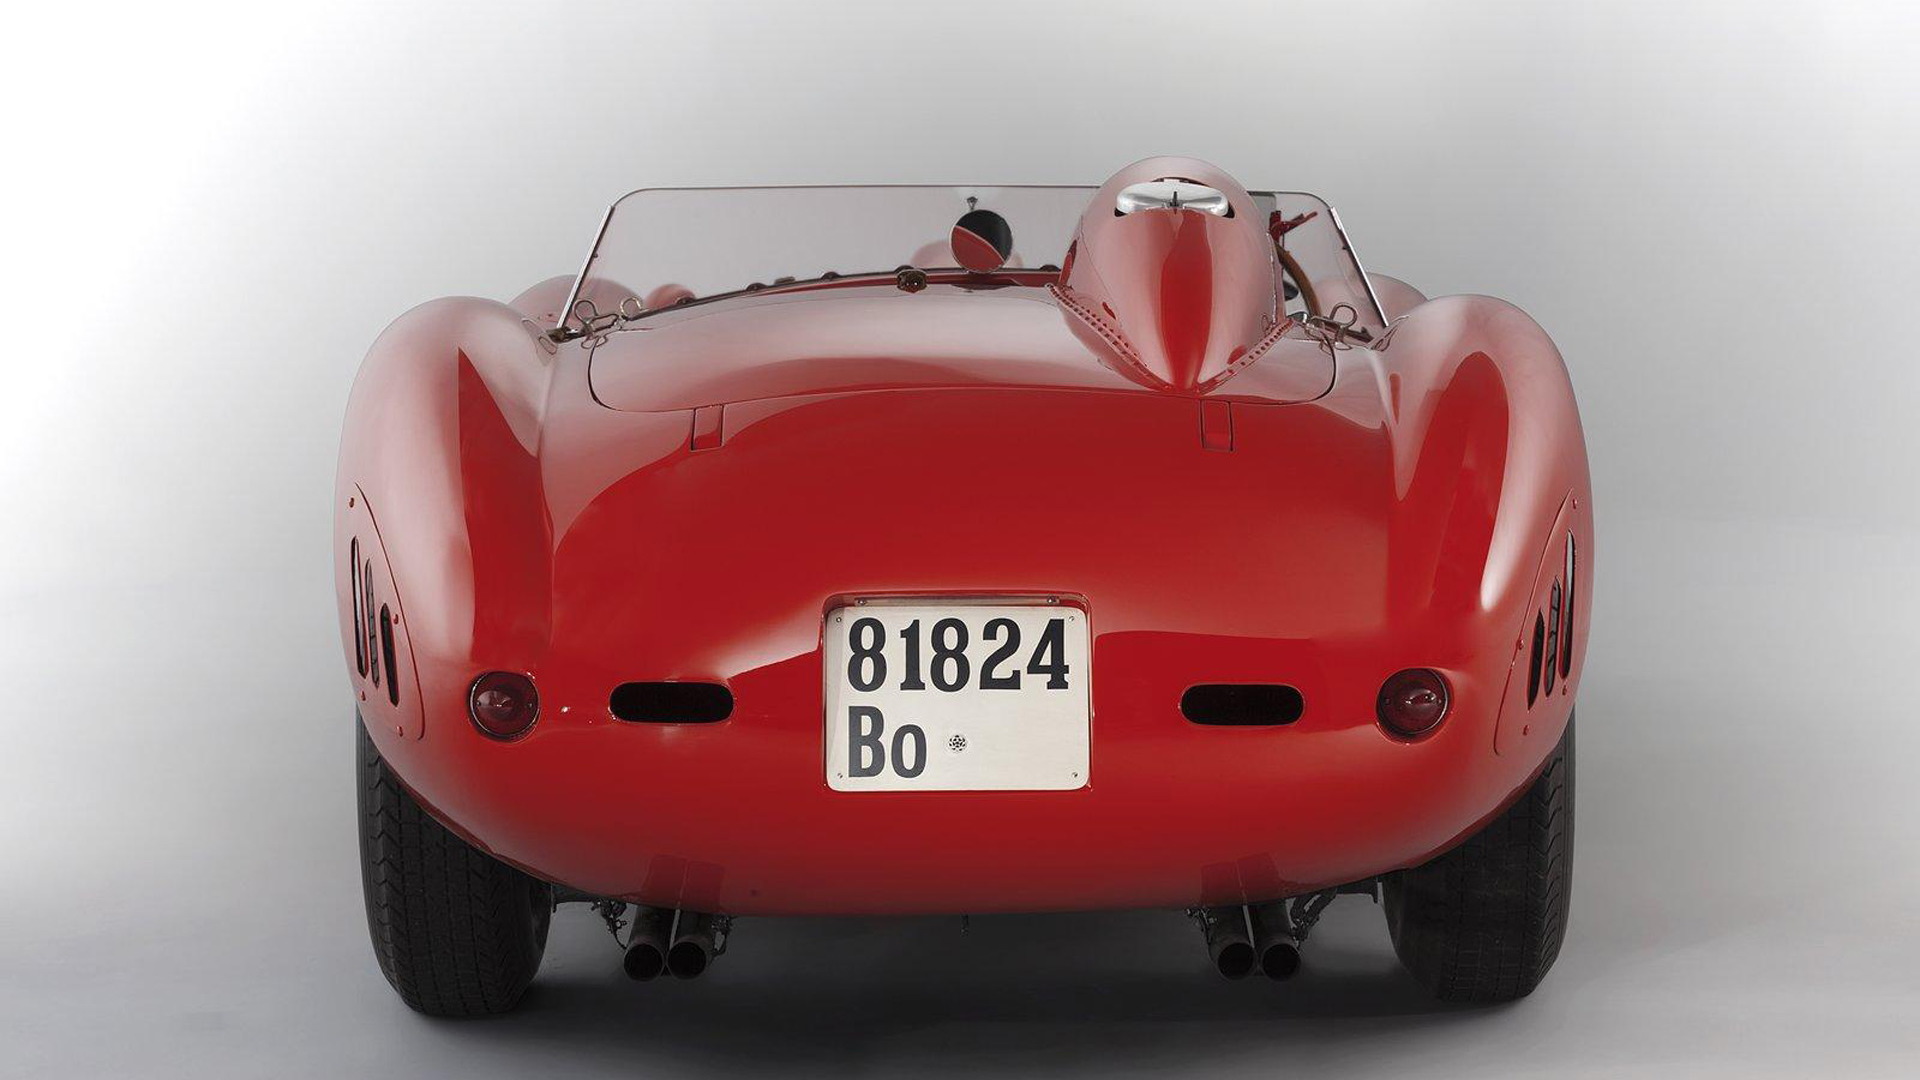 1957 Ferrari 335 S chassis number 0674